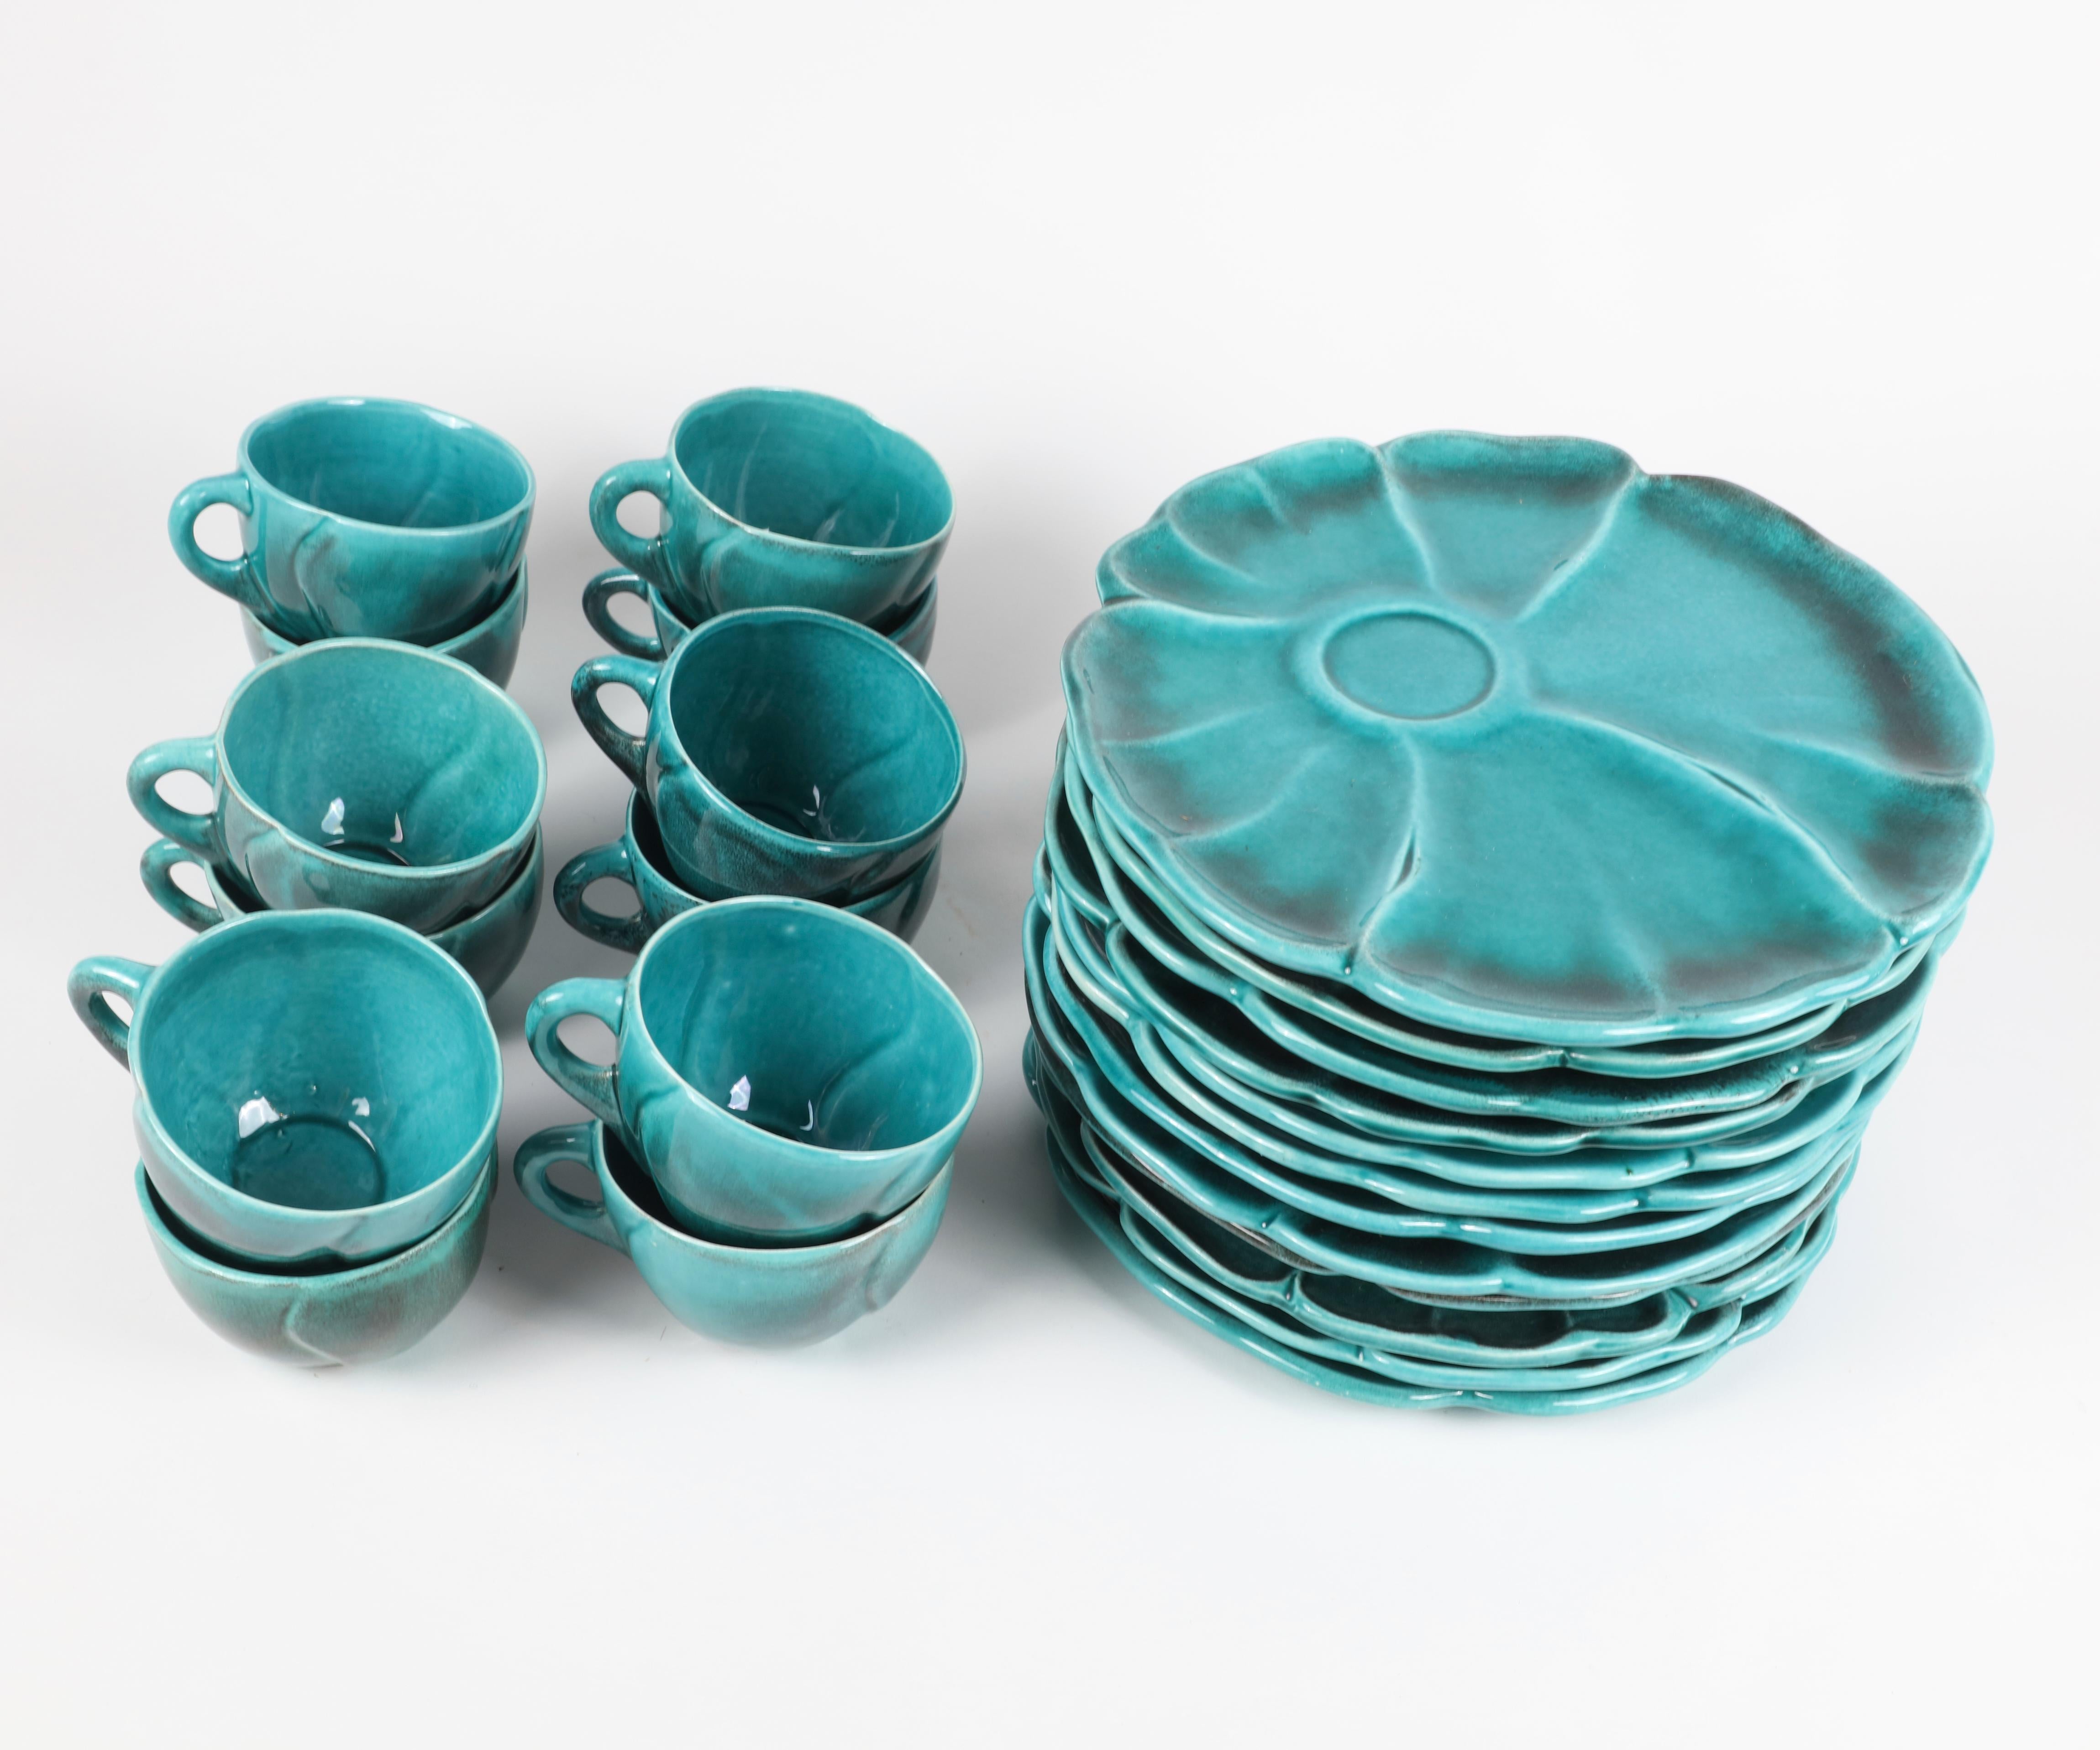 Turquoise ceramic Luncheon set for 12 cups and plates

Plates 10